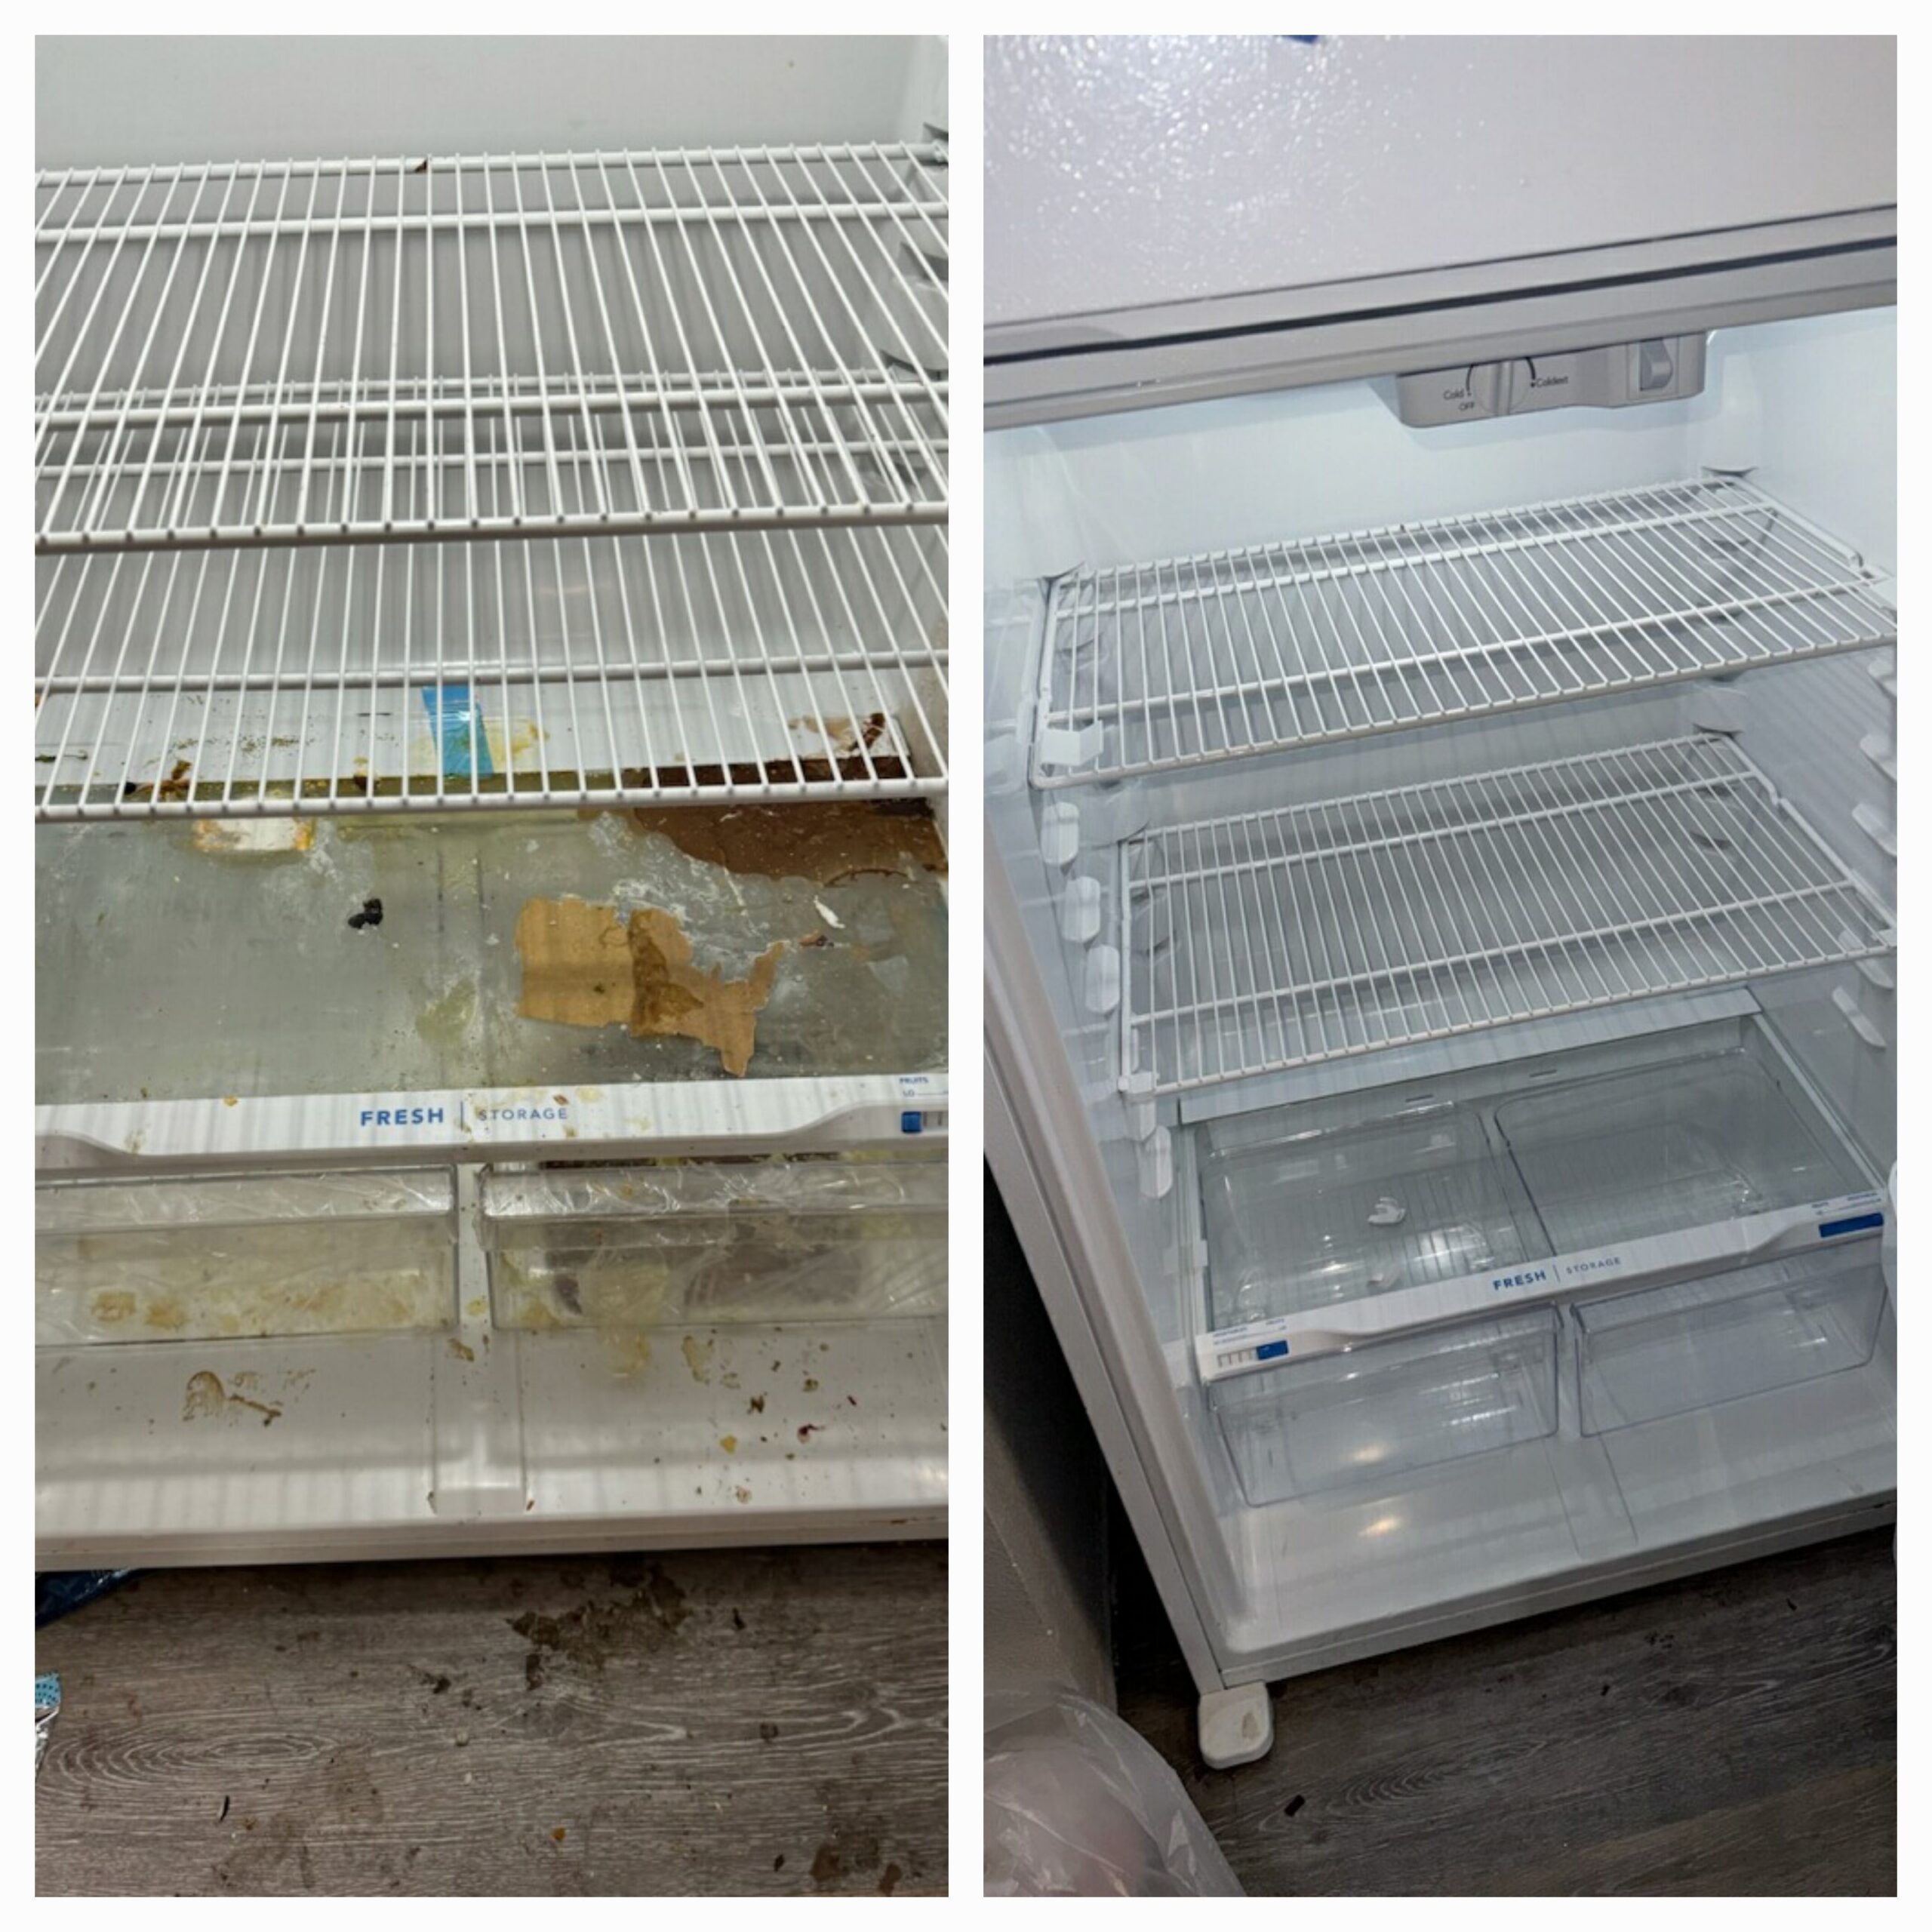 Before and after pictures of a refrigerator with the door open